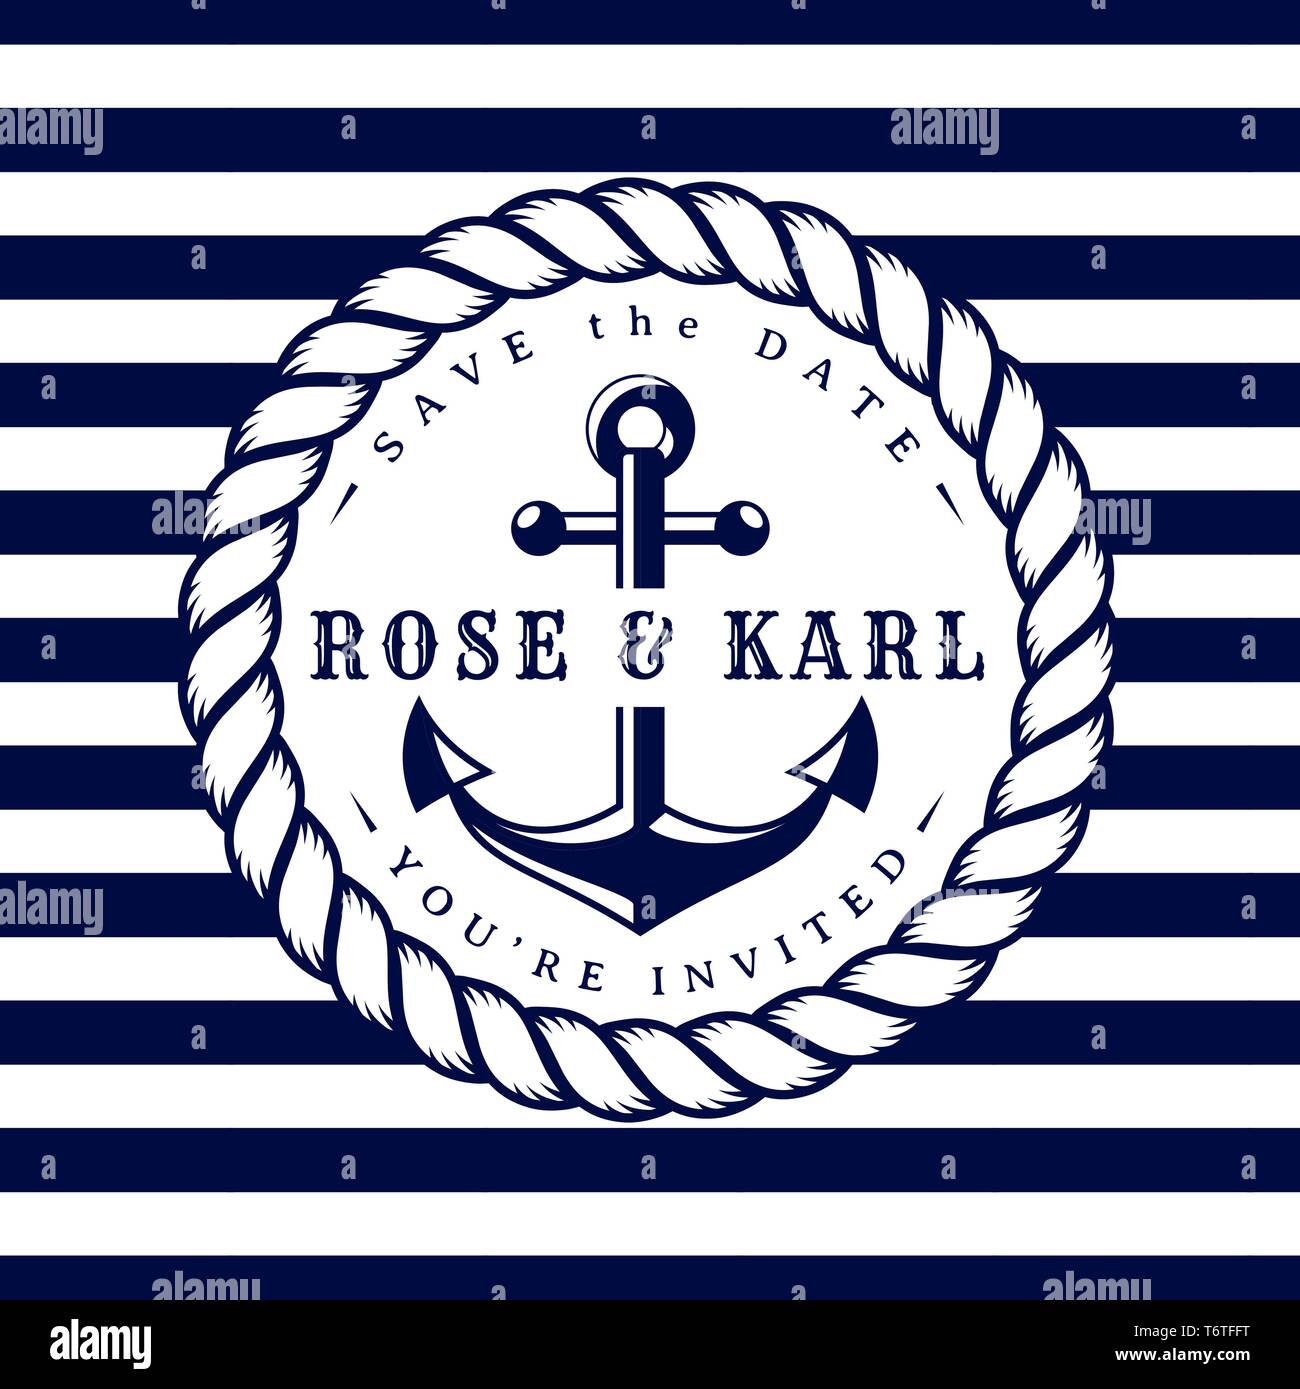 Nautical wedding invitation card. Sea theme wedding party. Elegant template with anchor, rope and stripes. Vector illustration in white and dark blue  Stock Vector